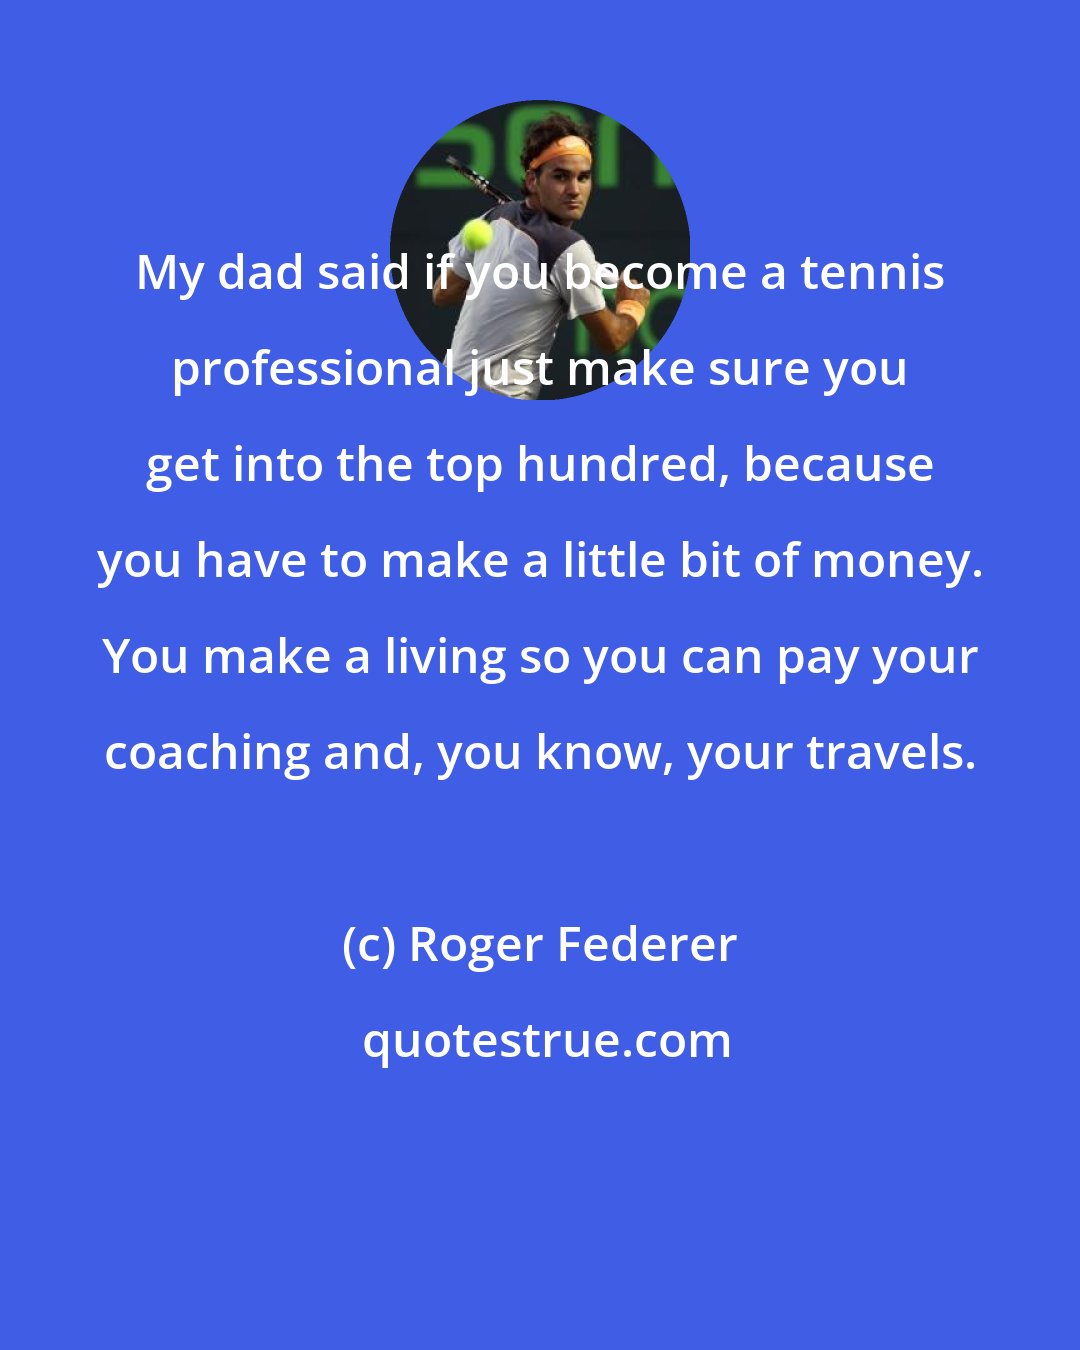 Roger Federer: My dad said if you become a tennis professional just make sure you get into the top hundred, because you have to make a little bit of money. You make a living so you can pay your coaching and, you know, your travels.